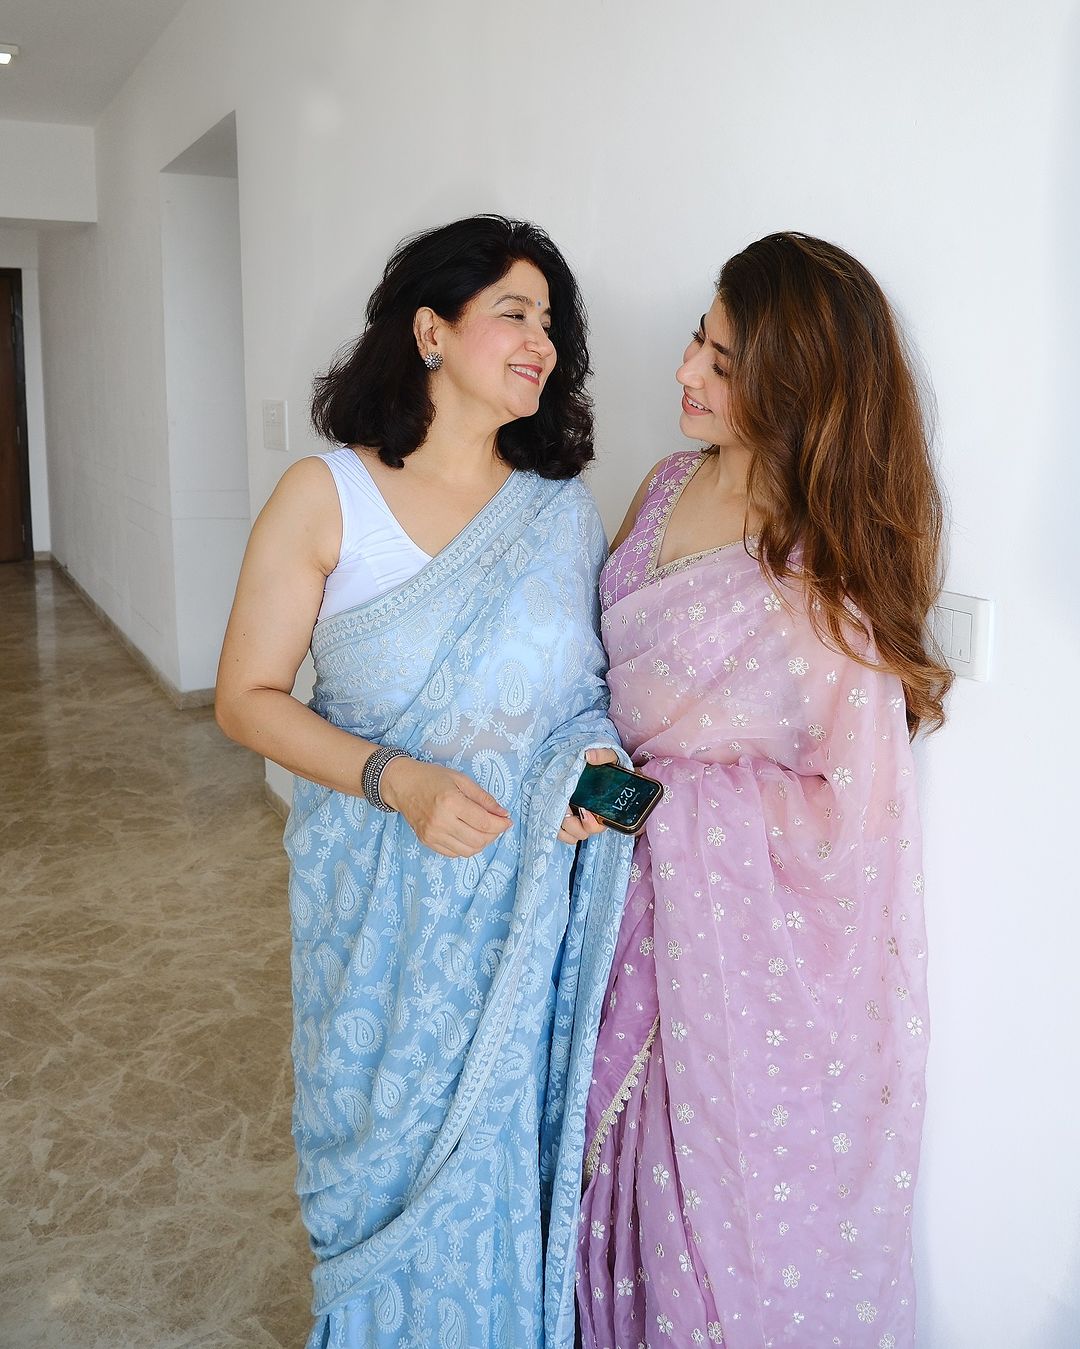 Mom’s Love And Support Are Precious! This Is What Actress Aditi Bhatia Proves By Sharing Her Gratitude Towards Her Mother. Read On To Know More About It!